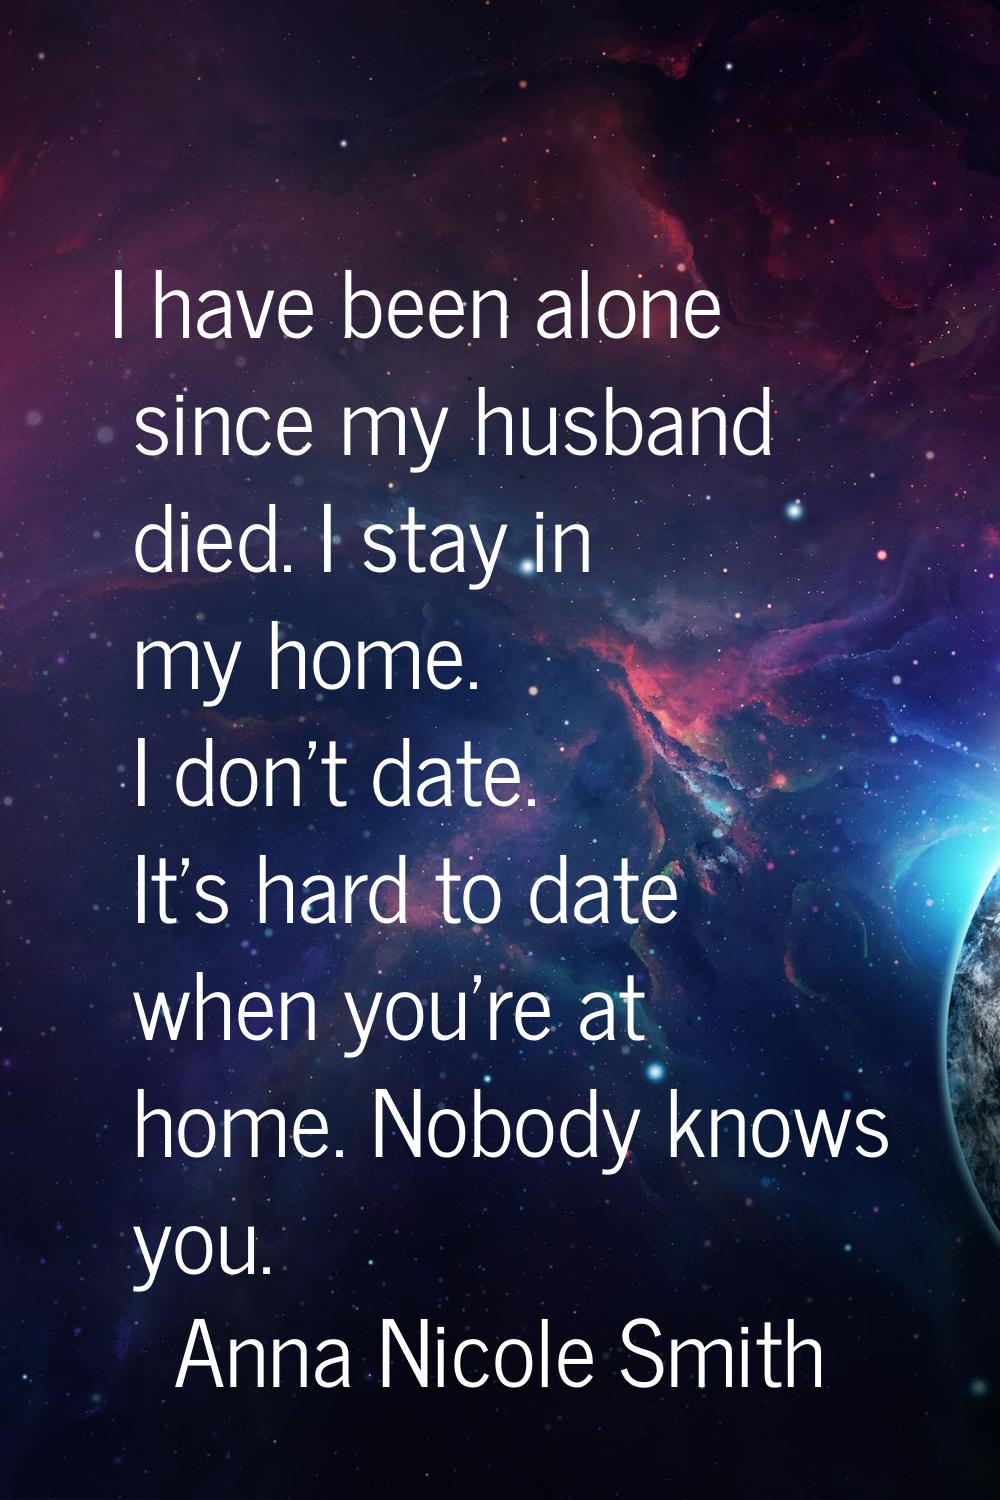 I have been alone since my husband died. I stay in my home. I don't date. It's hard to date when yo